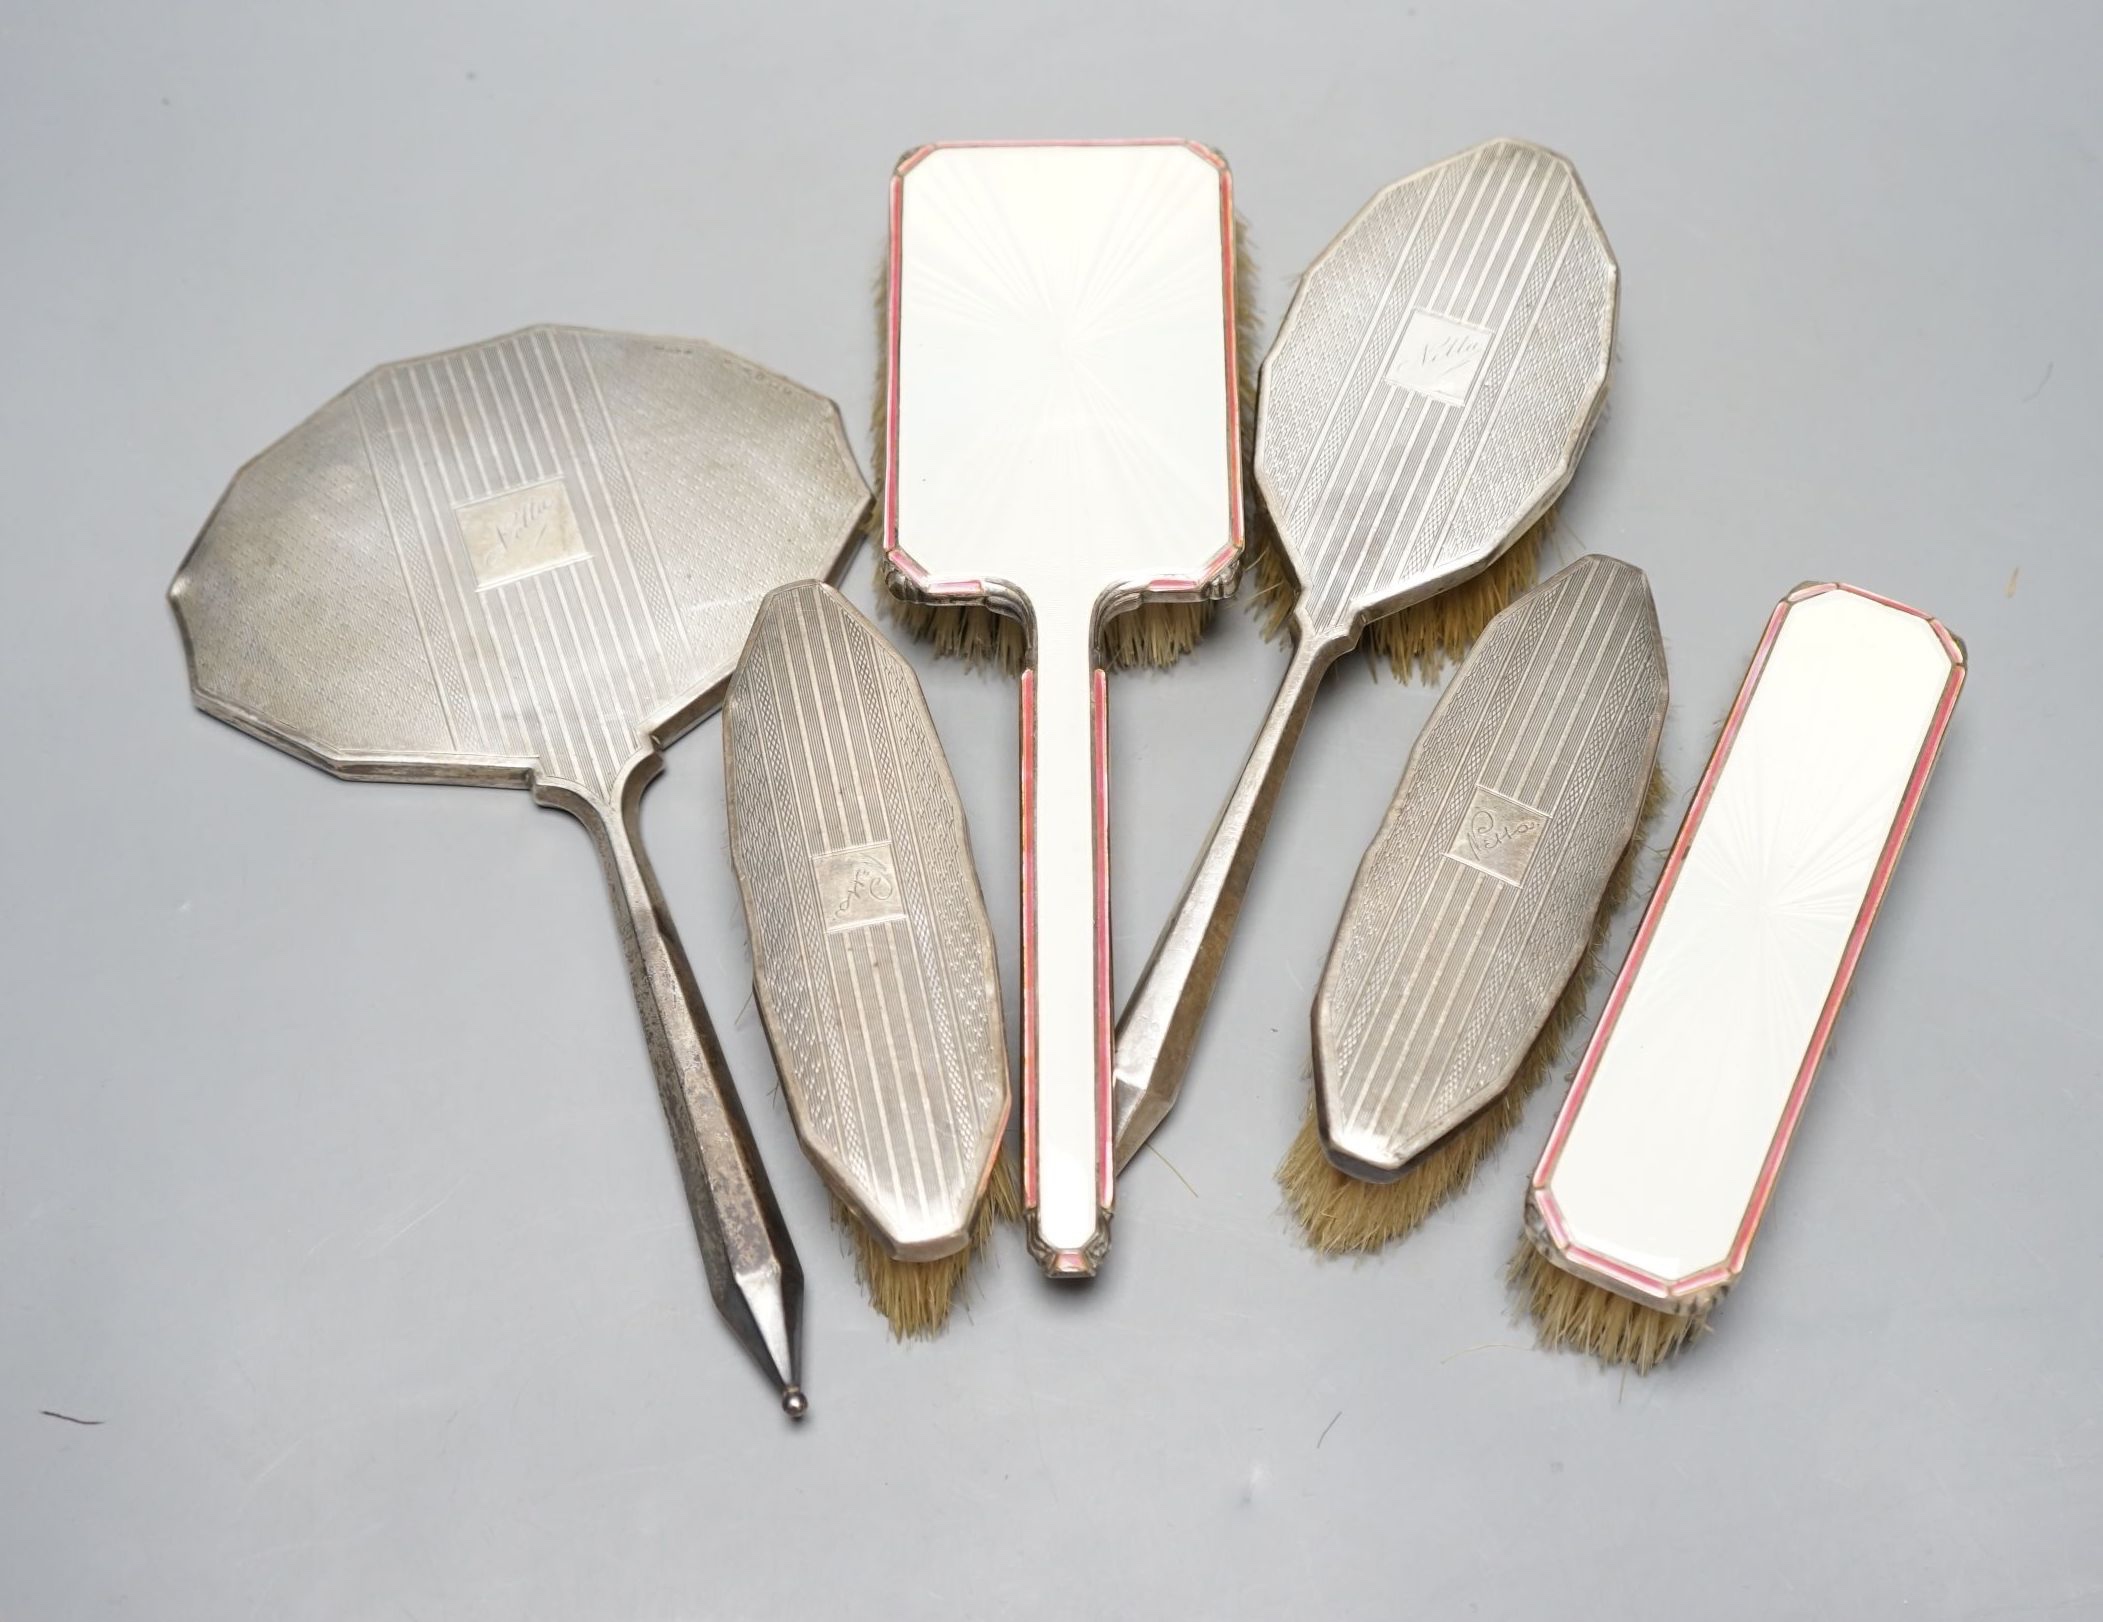 Two 1950's silver and enamel mounted brushes and an earlier four piece silver mounted brush set.